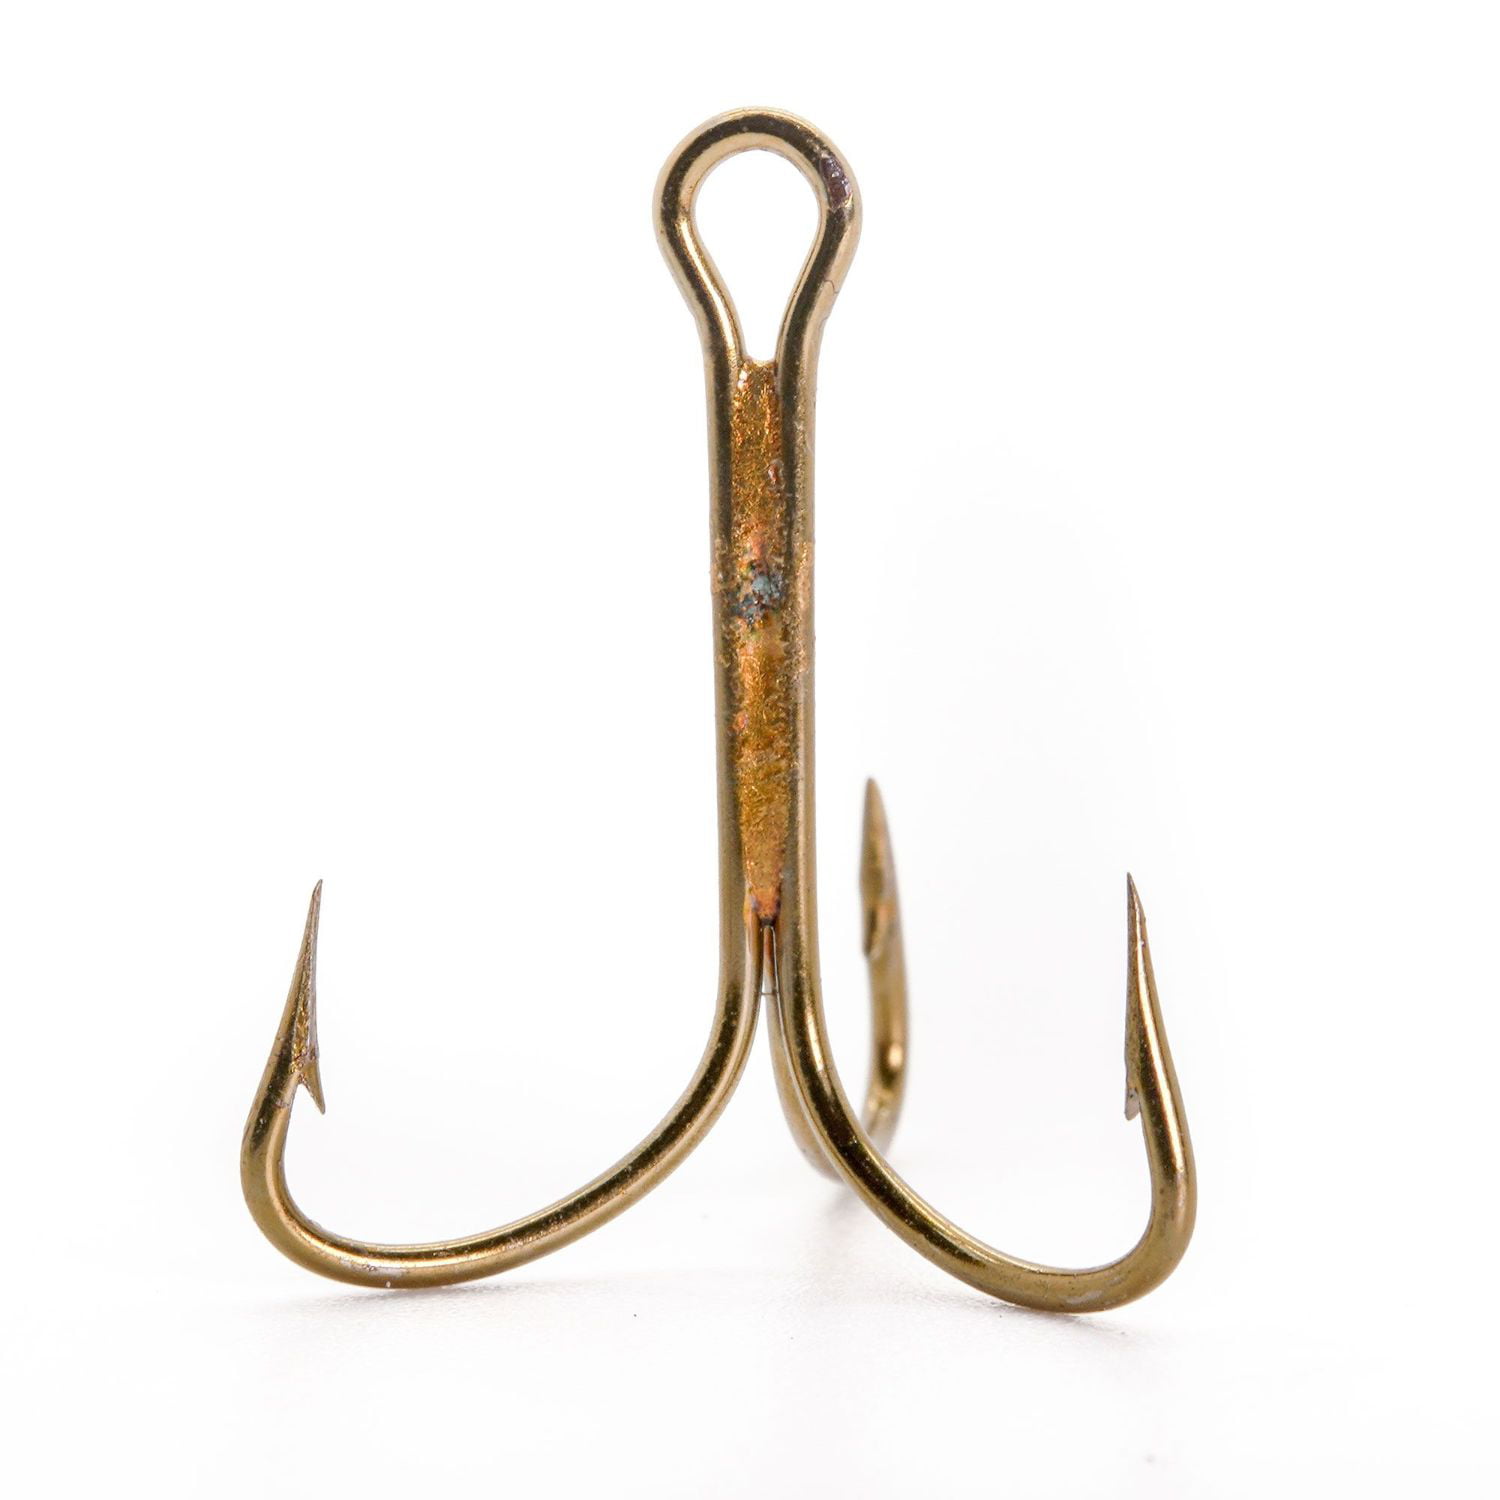 25 Pack Mustad Classic Gold Small Treble Fishing Hook 3551-GL Select Size 